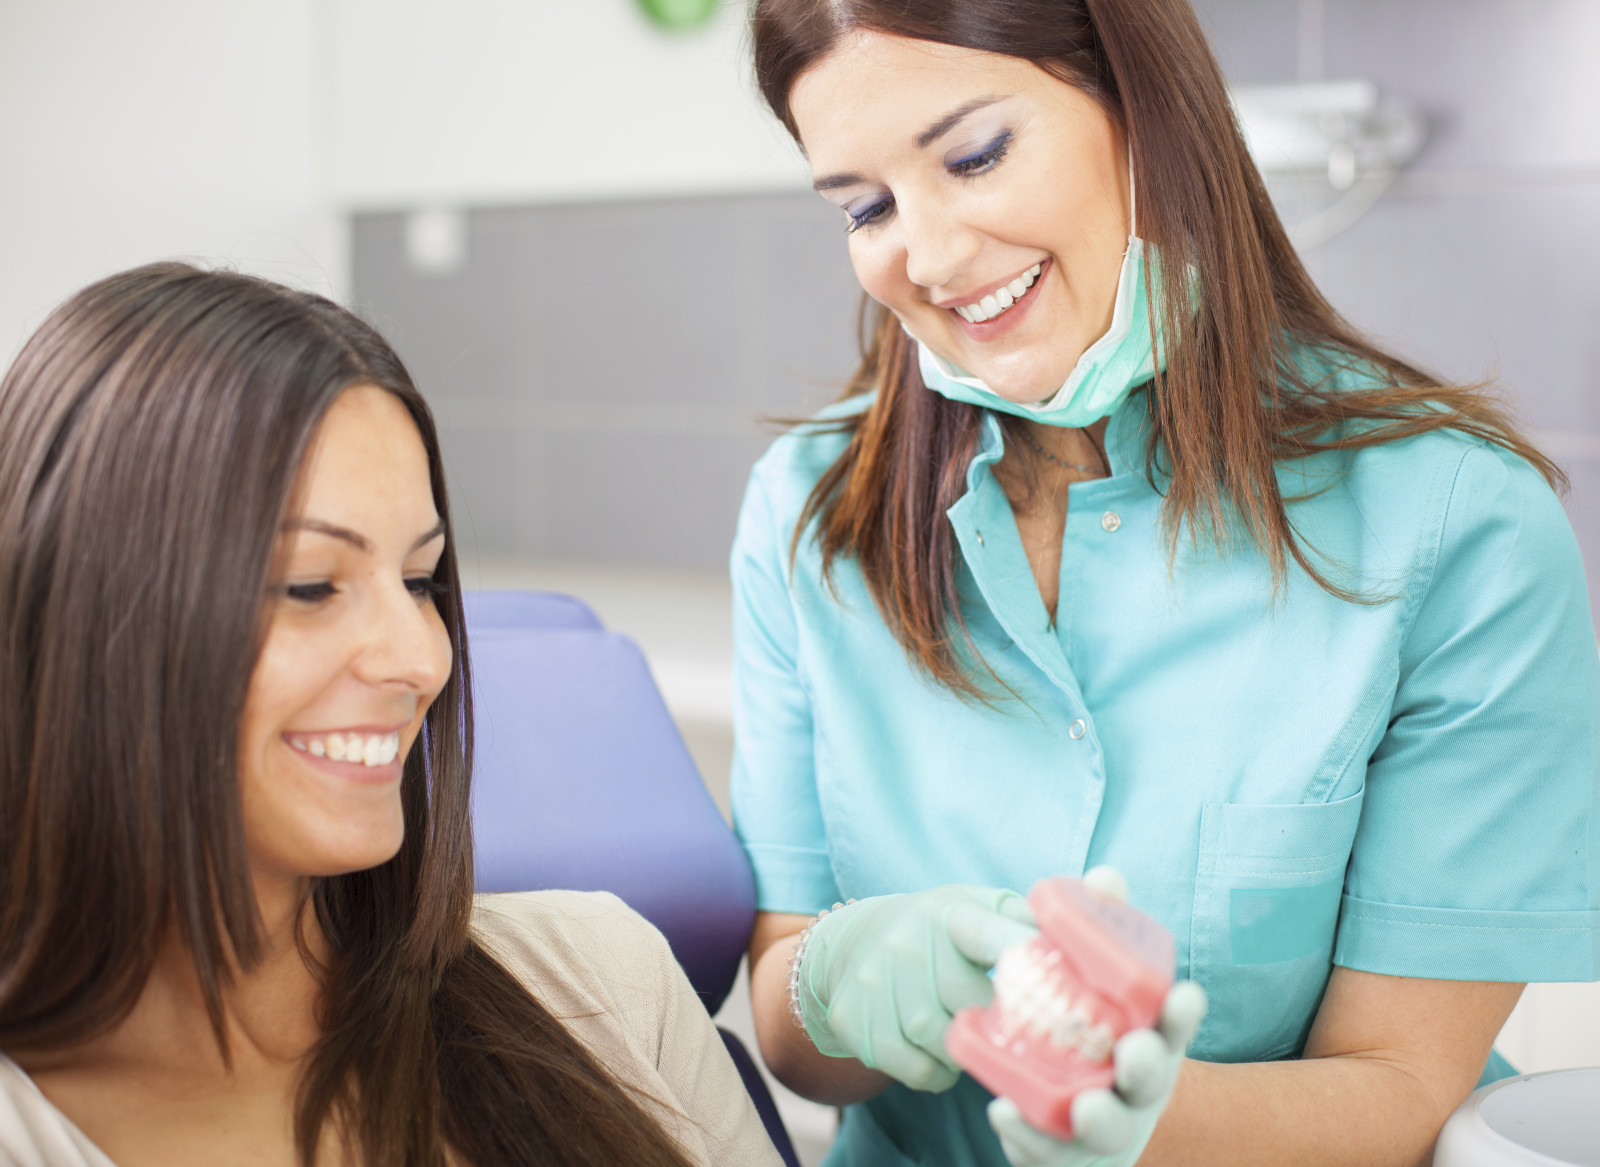 Dental assistant with a patient